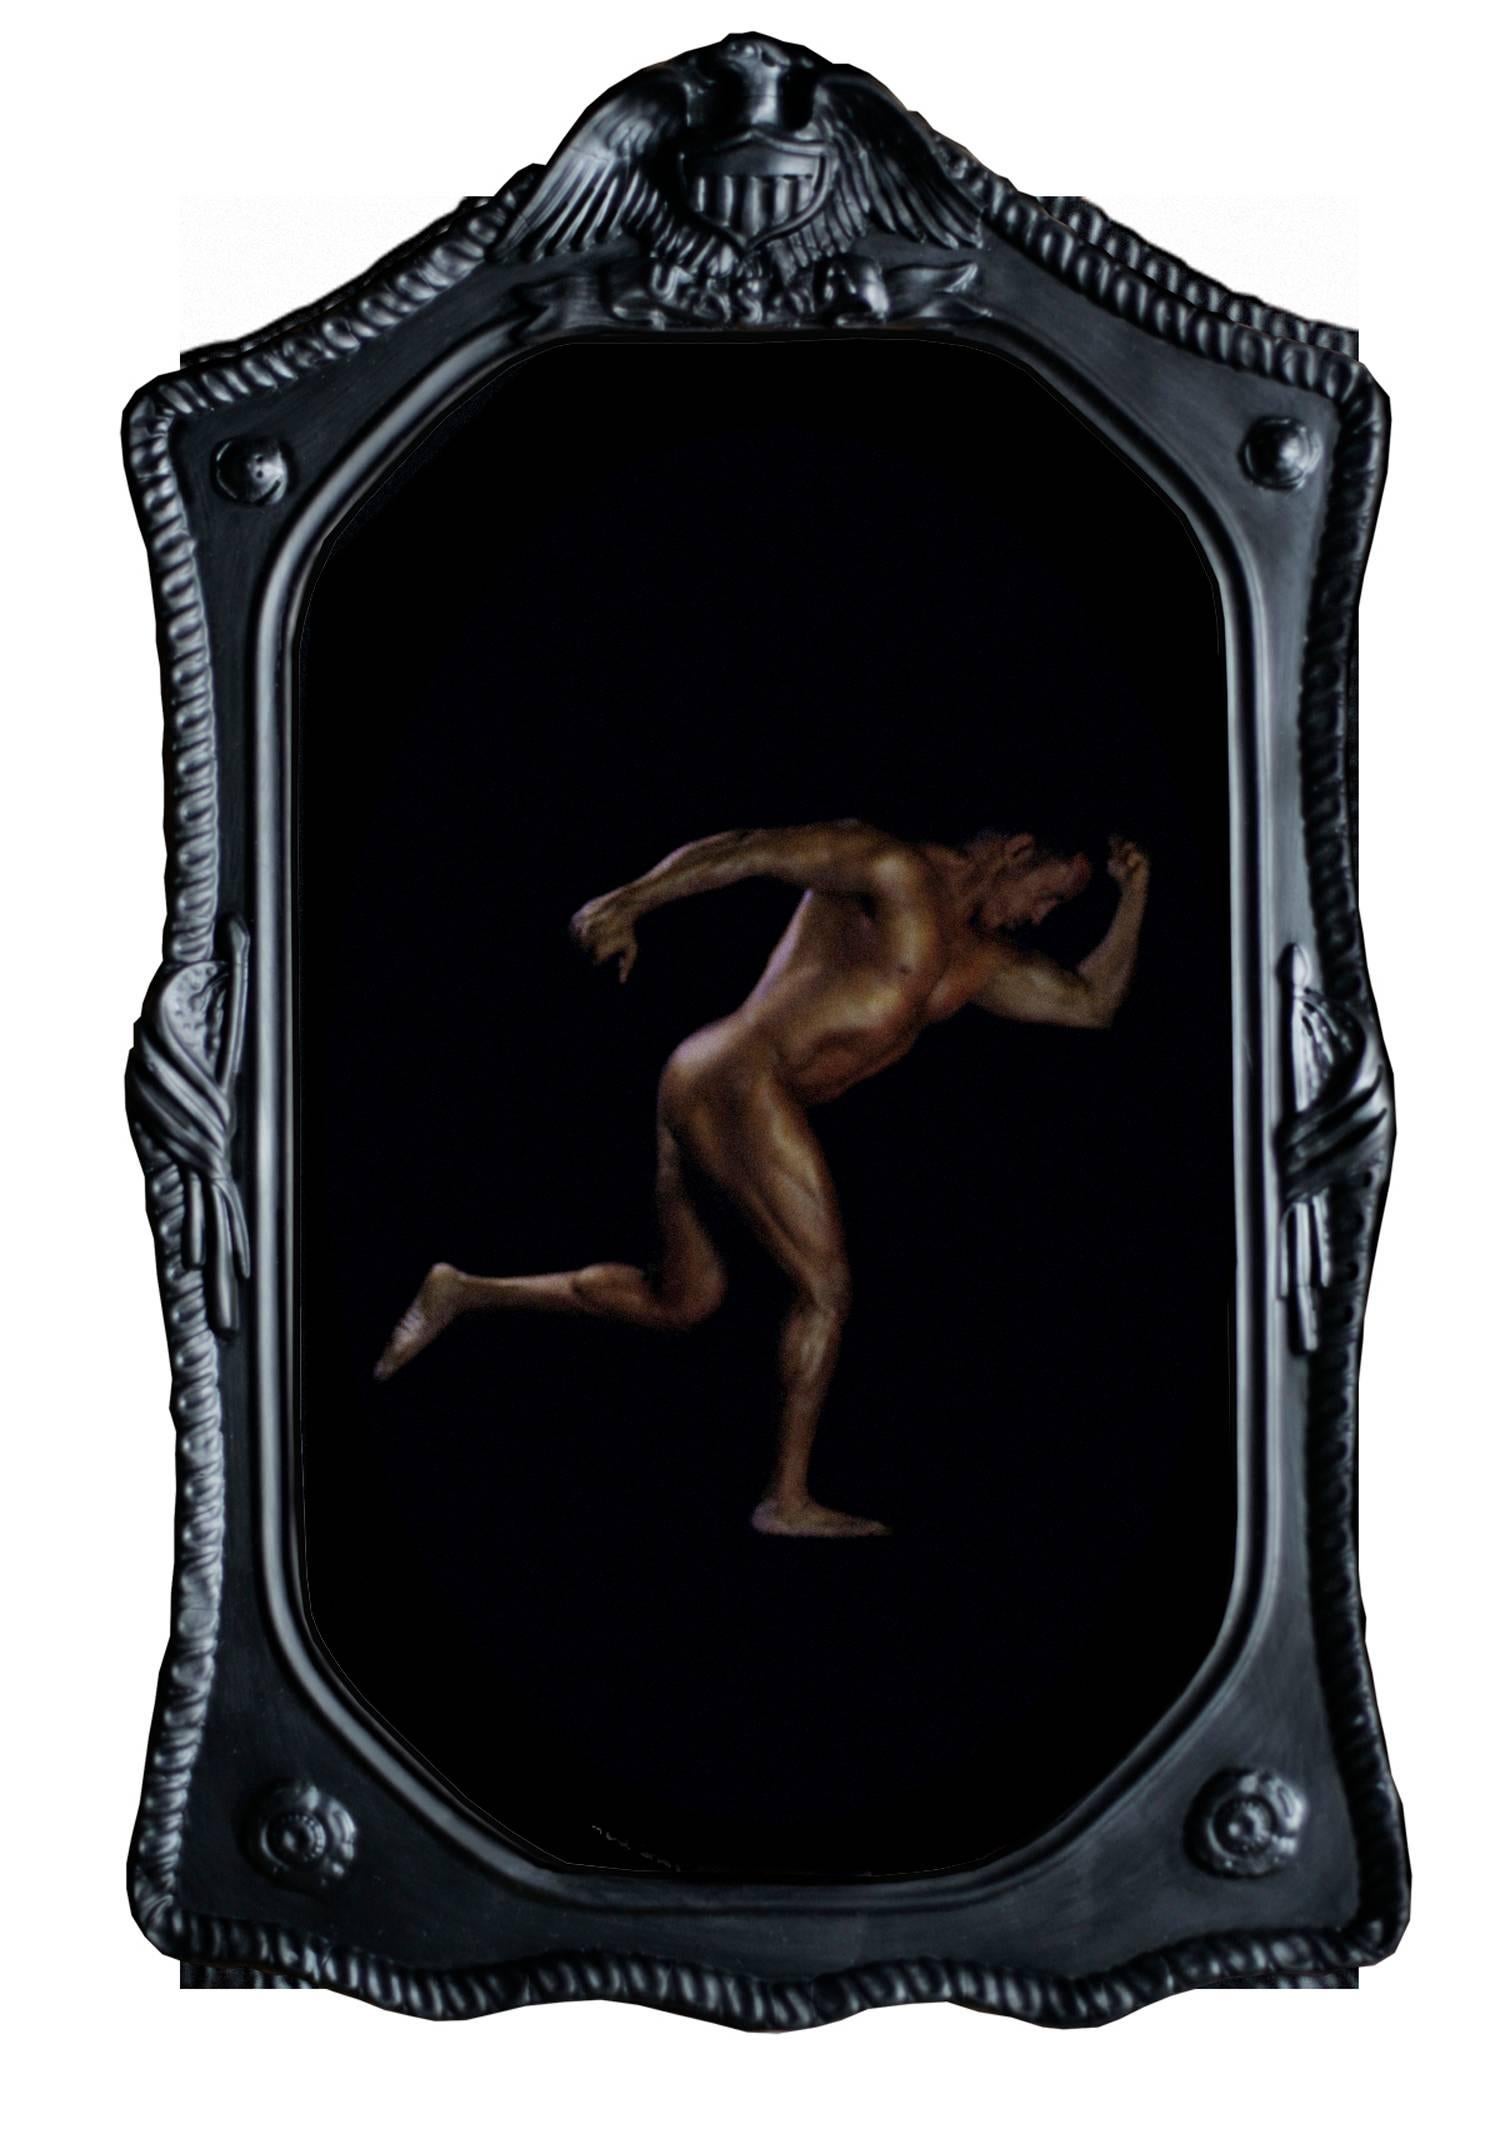 Miguel as Runner, Antique frame included